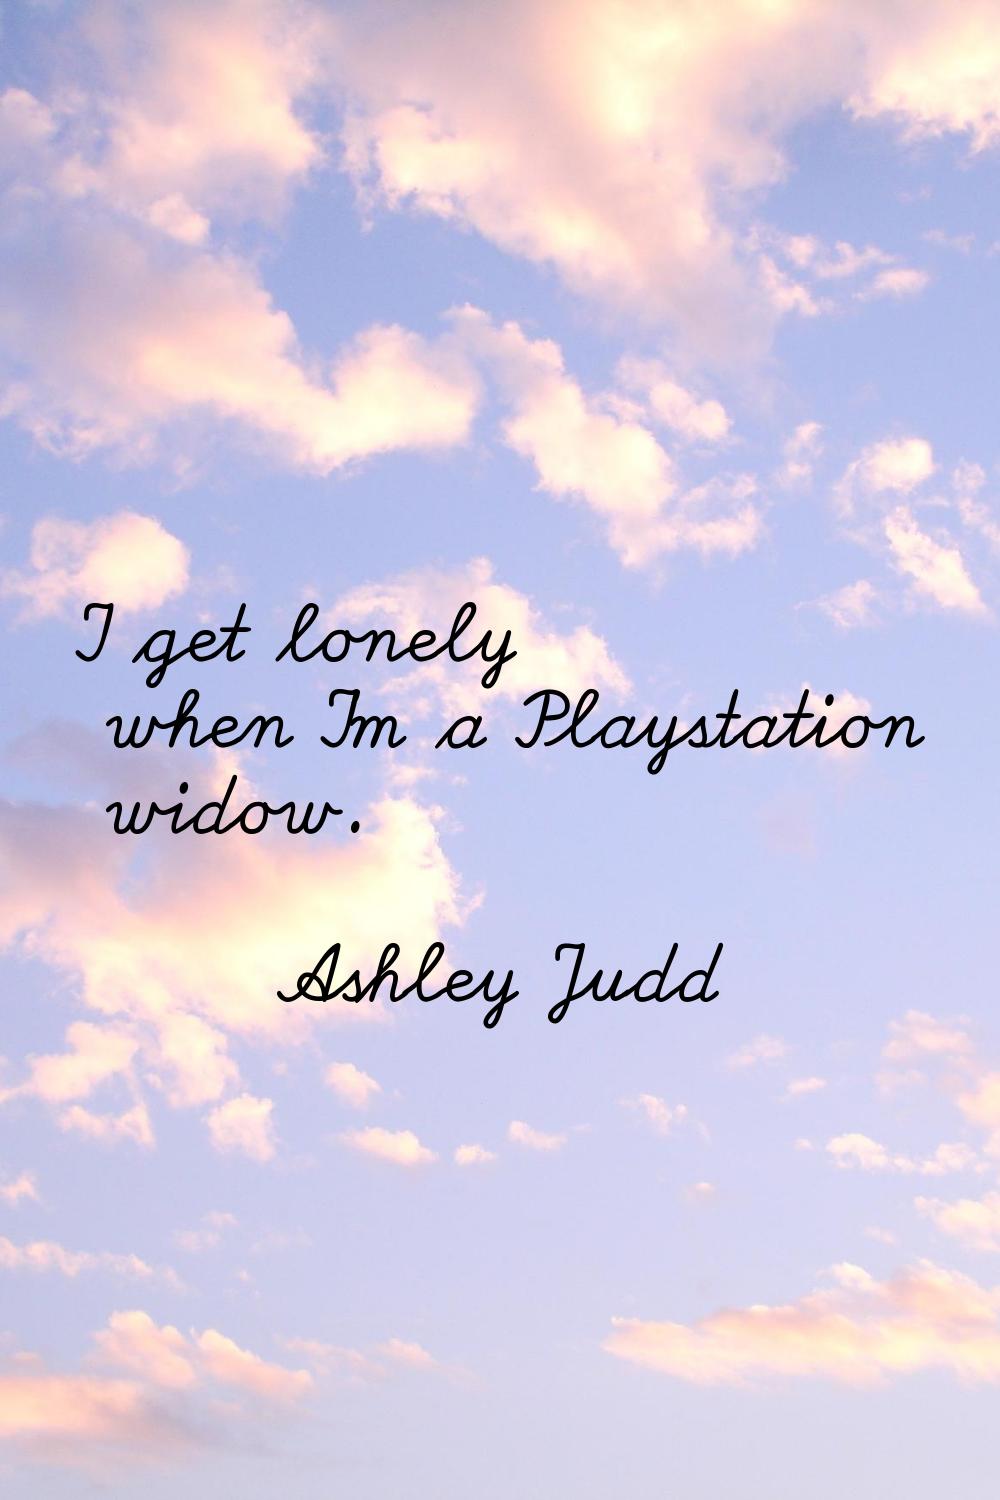 I get lonely when I'm a Playstation widow.